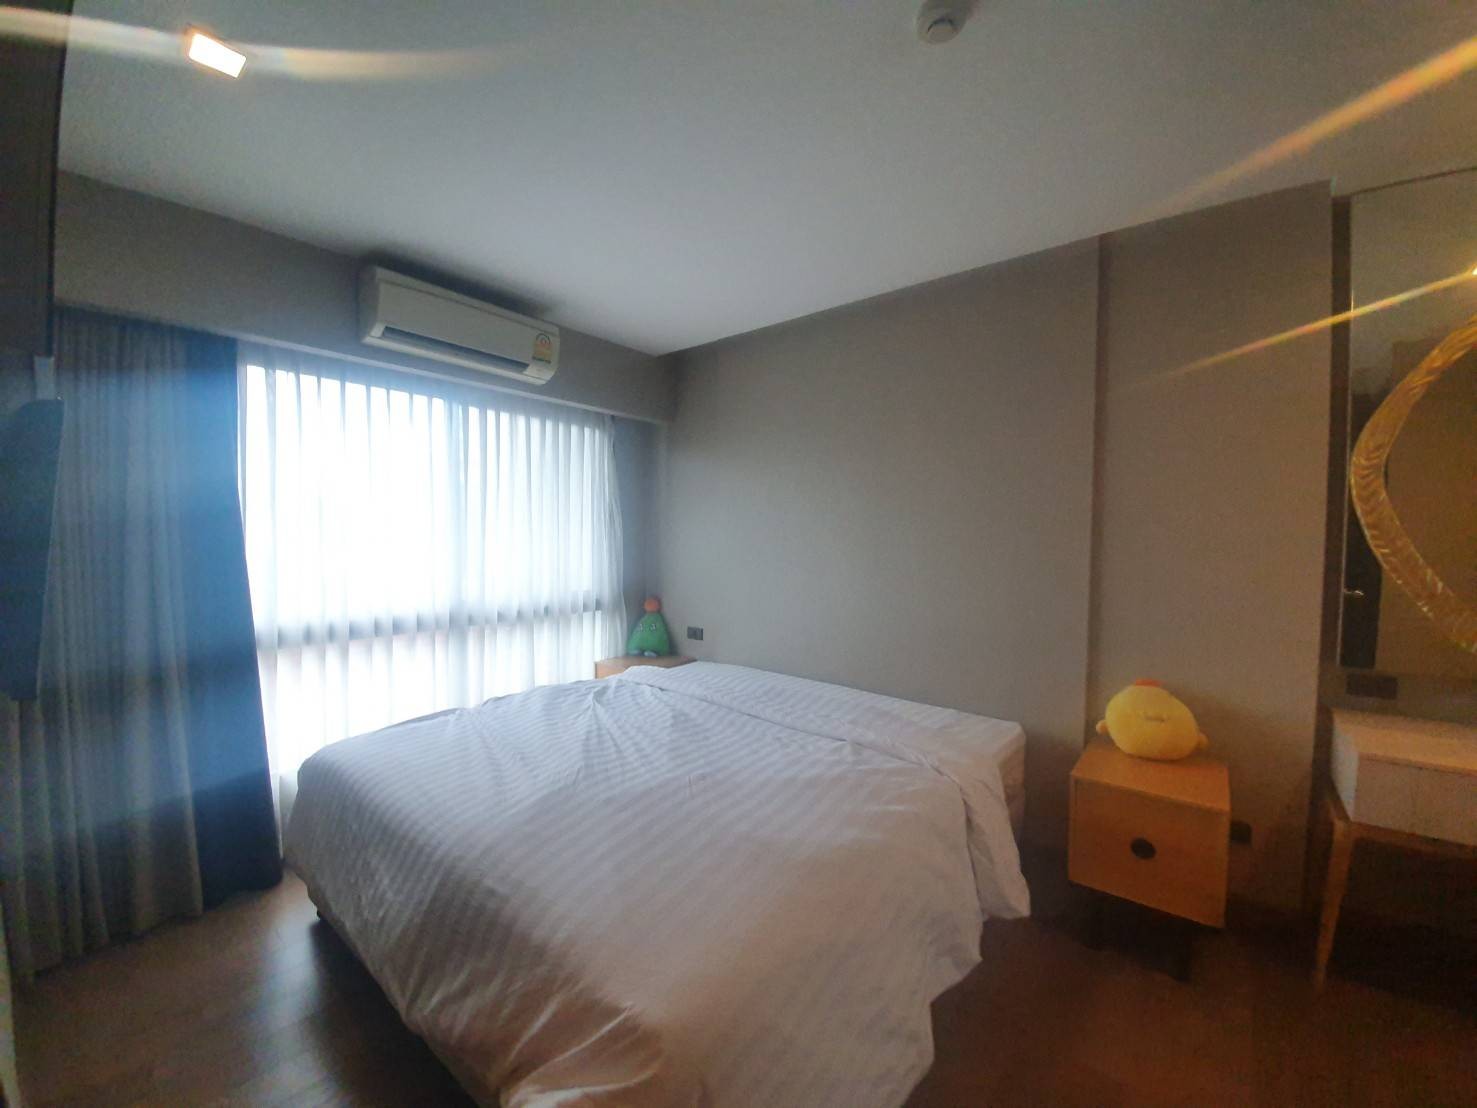 Room for Rent Tidy Thonglor condo 42Smq 1 Bedroom Heart of Thonglor 16K per Month  รูปที่ 1